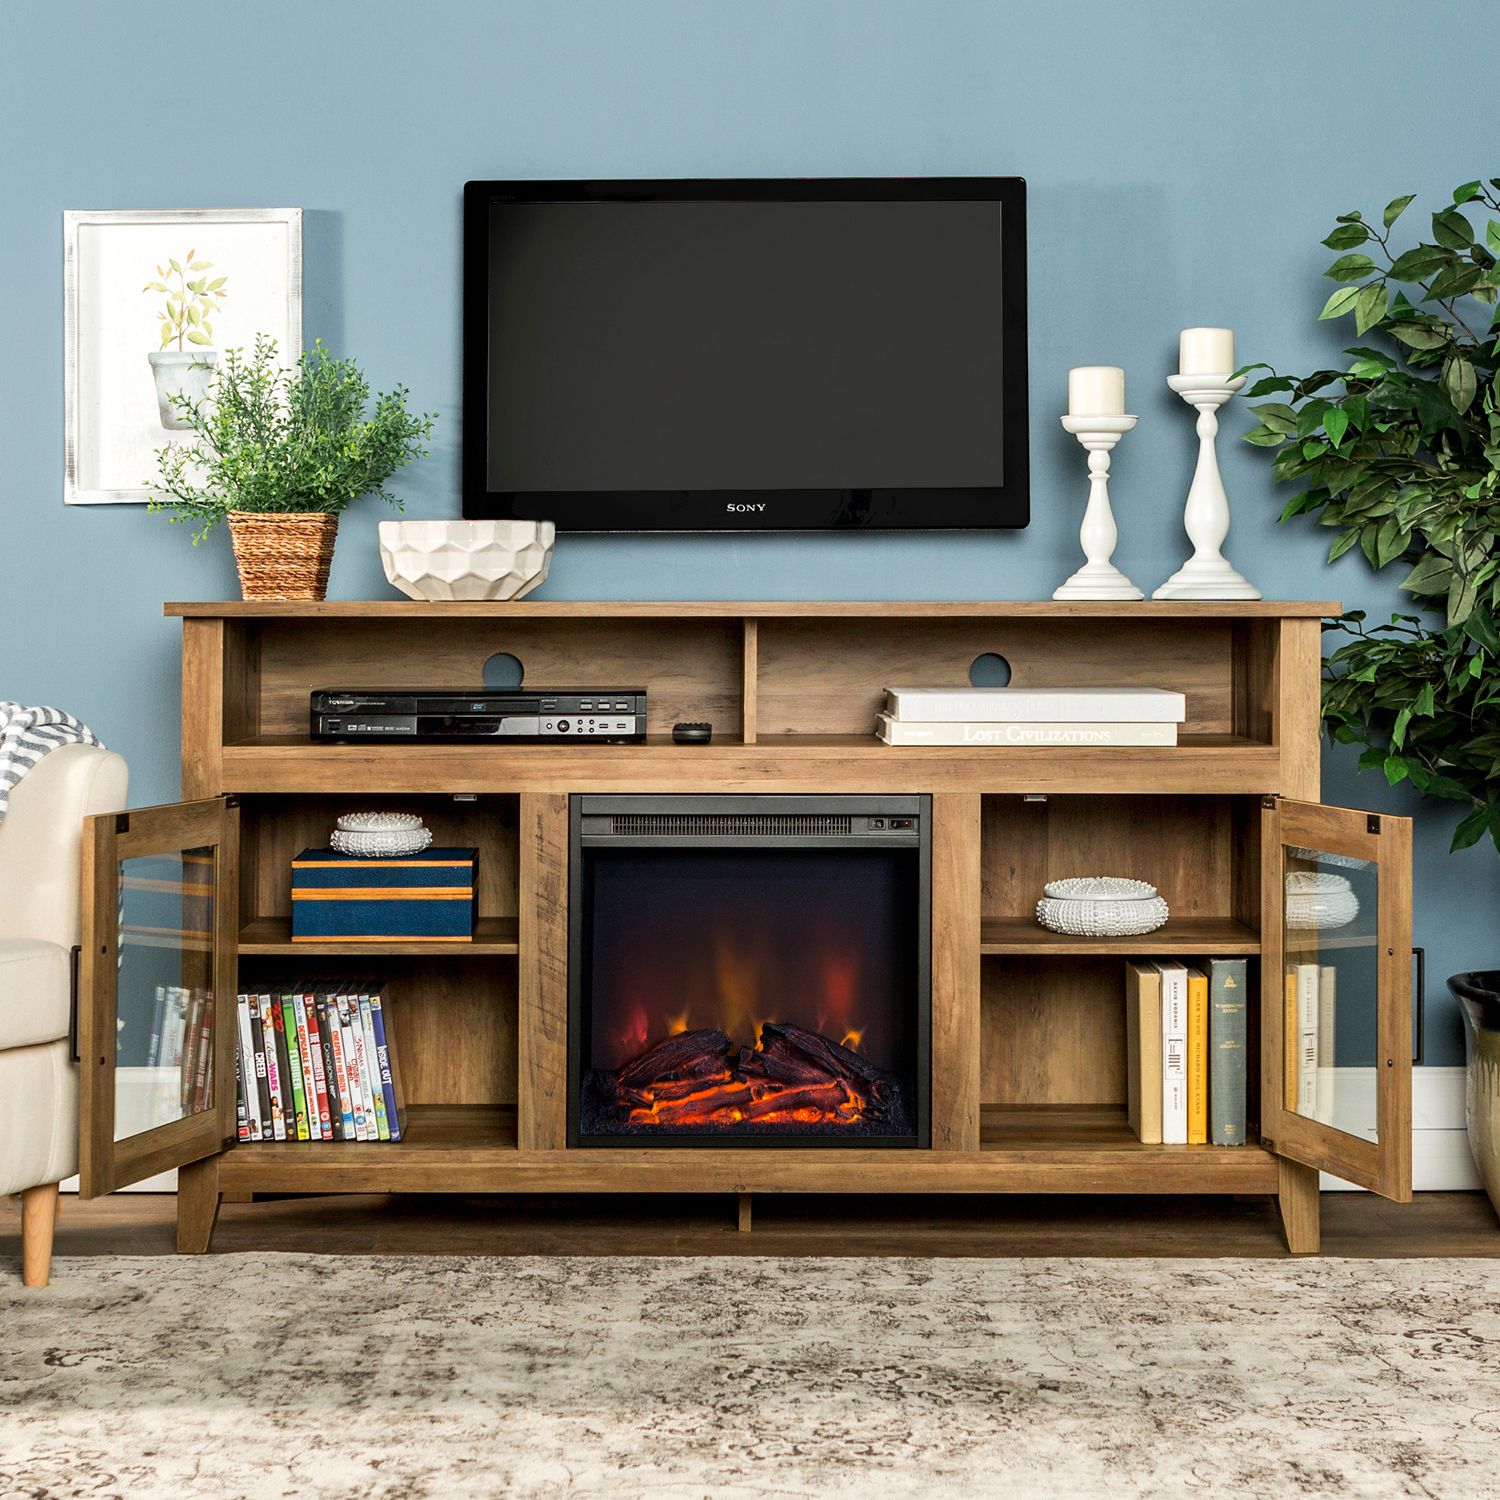 Highboy Wood Fireplace Tv Stand – Pier1 Intended For Wood Highboy Fireplace Tv Stands (Gallery 3 of 20)